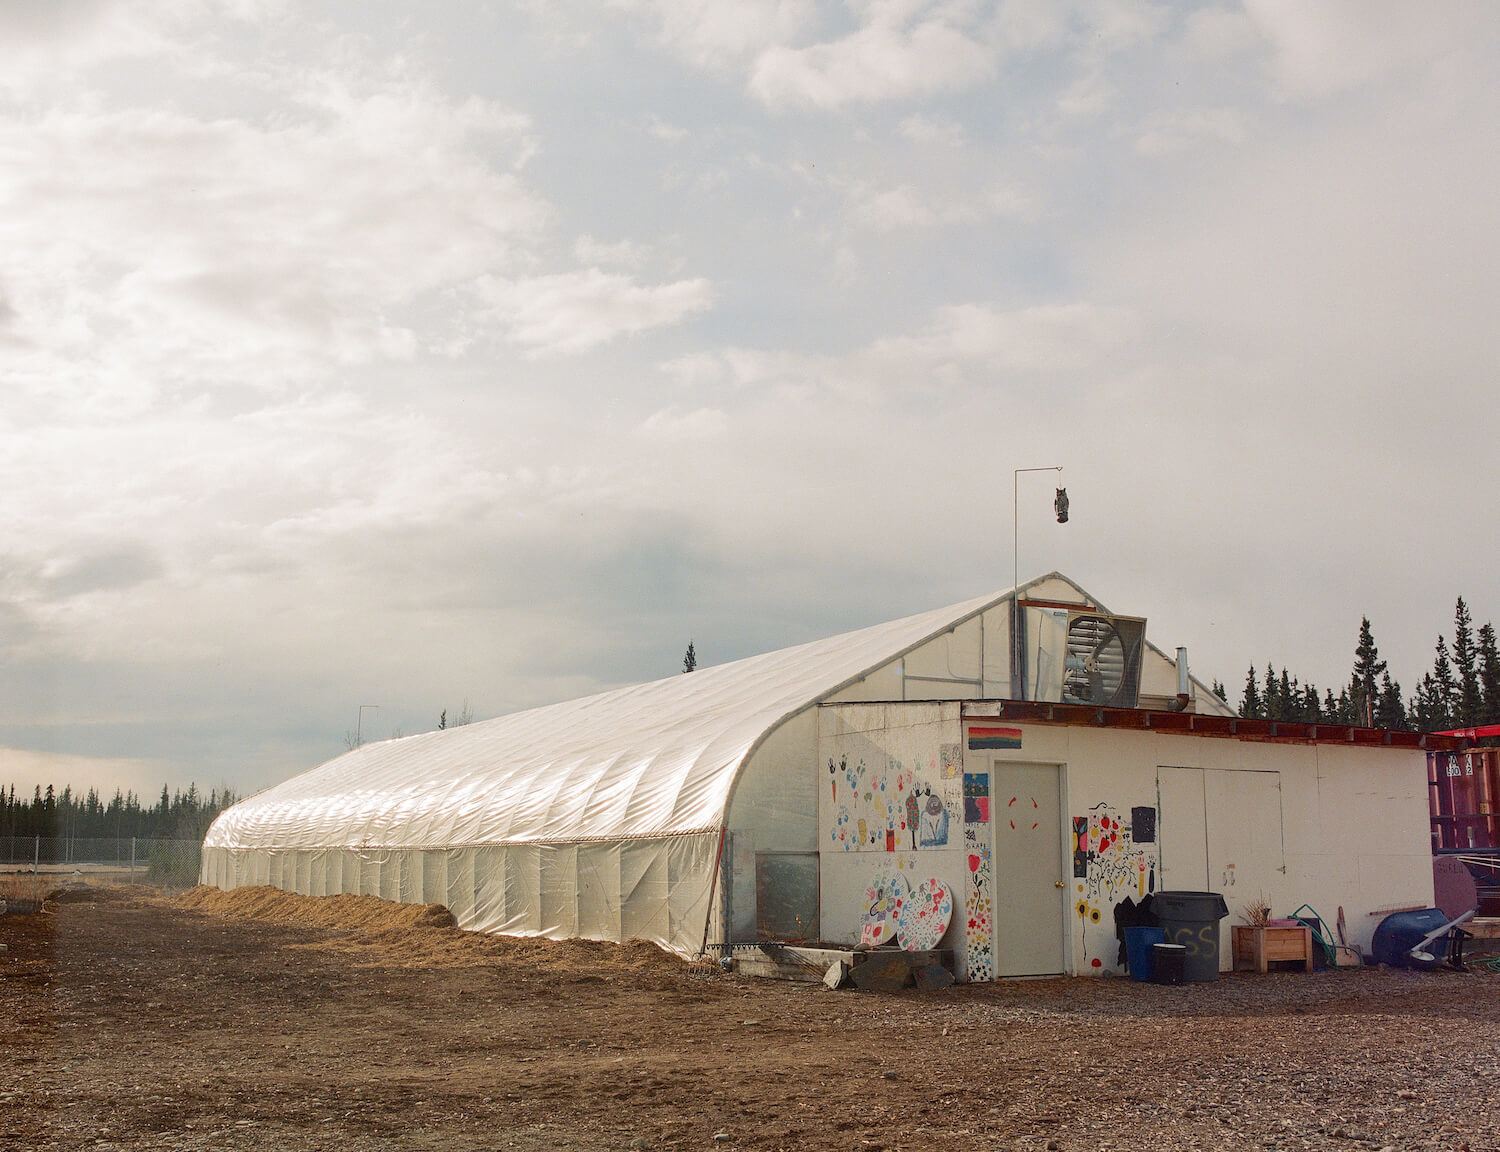 The biomass-heated greenhouse at the Tok school in Tok, Alaska.